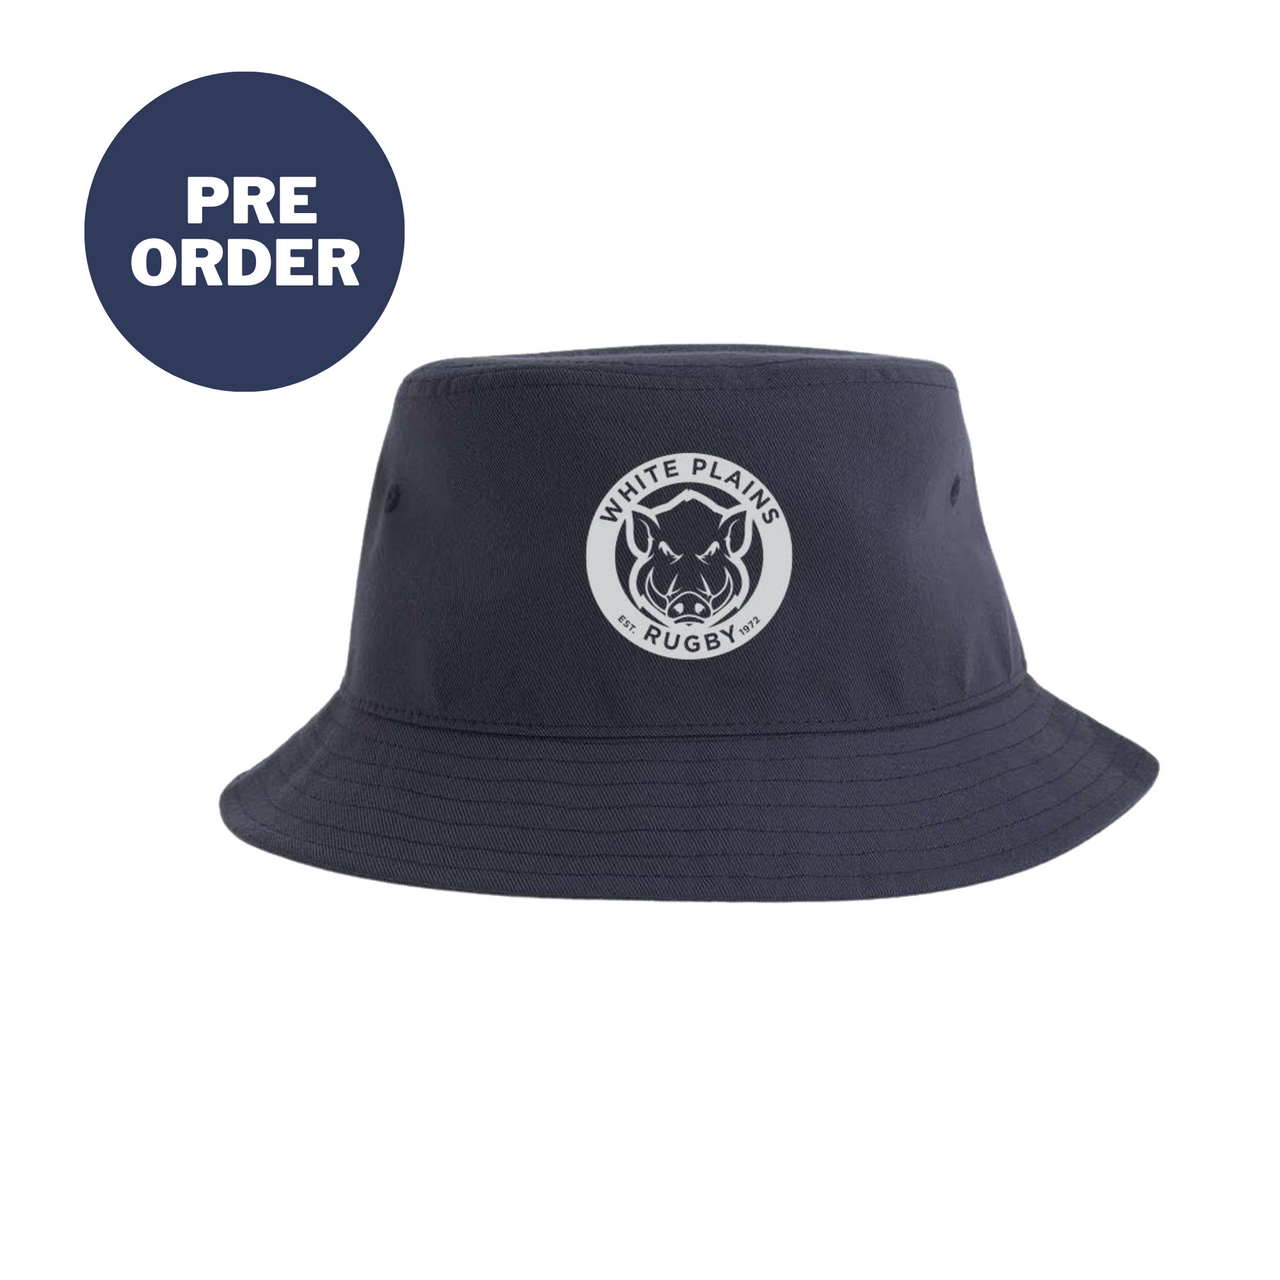 White Plains Rugby Bucket Hat